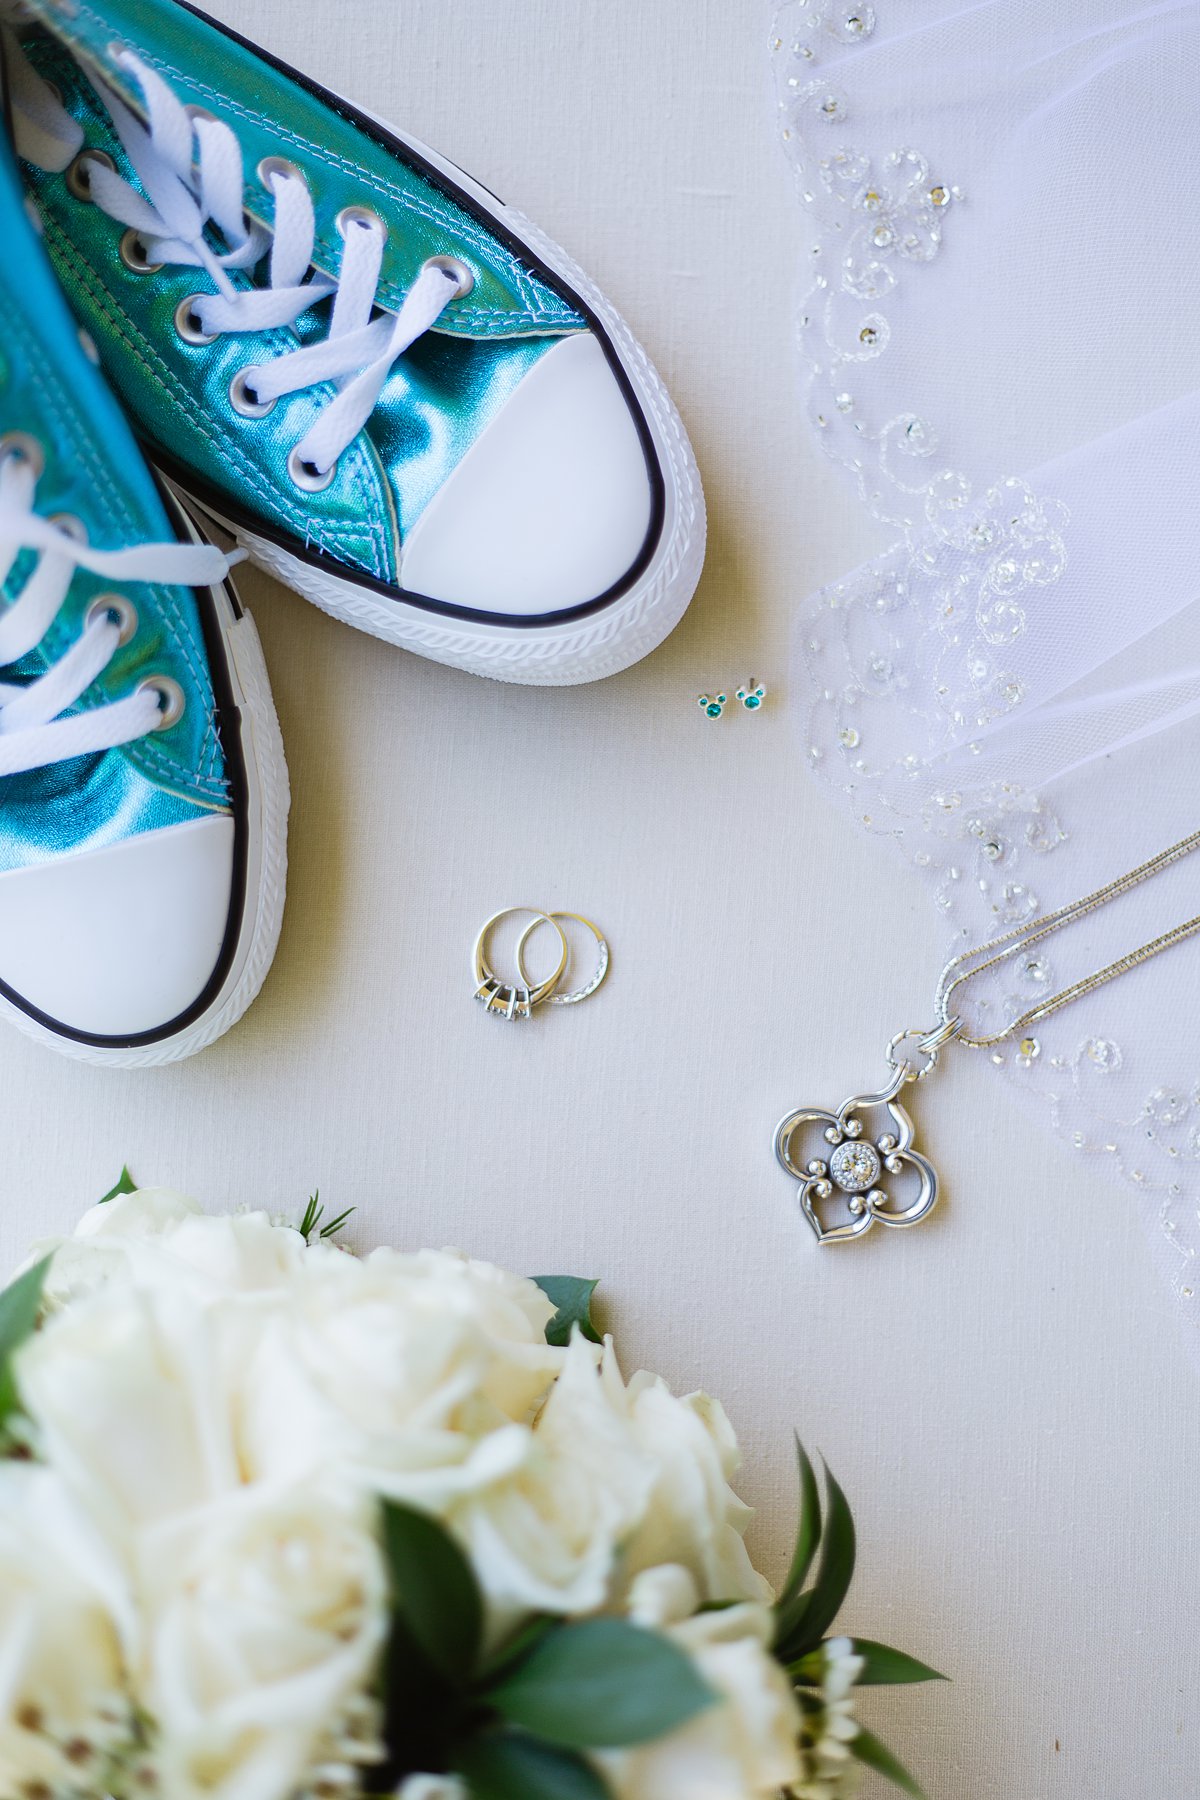 Bride's wedding details of metallic Turquoise converse, white roses, blue Mickey ear rings, wedding bands, necklace, and veil by PMA Photography.